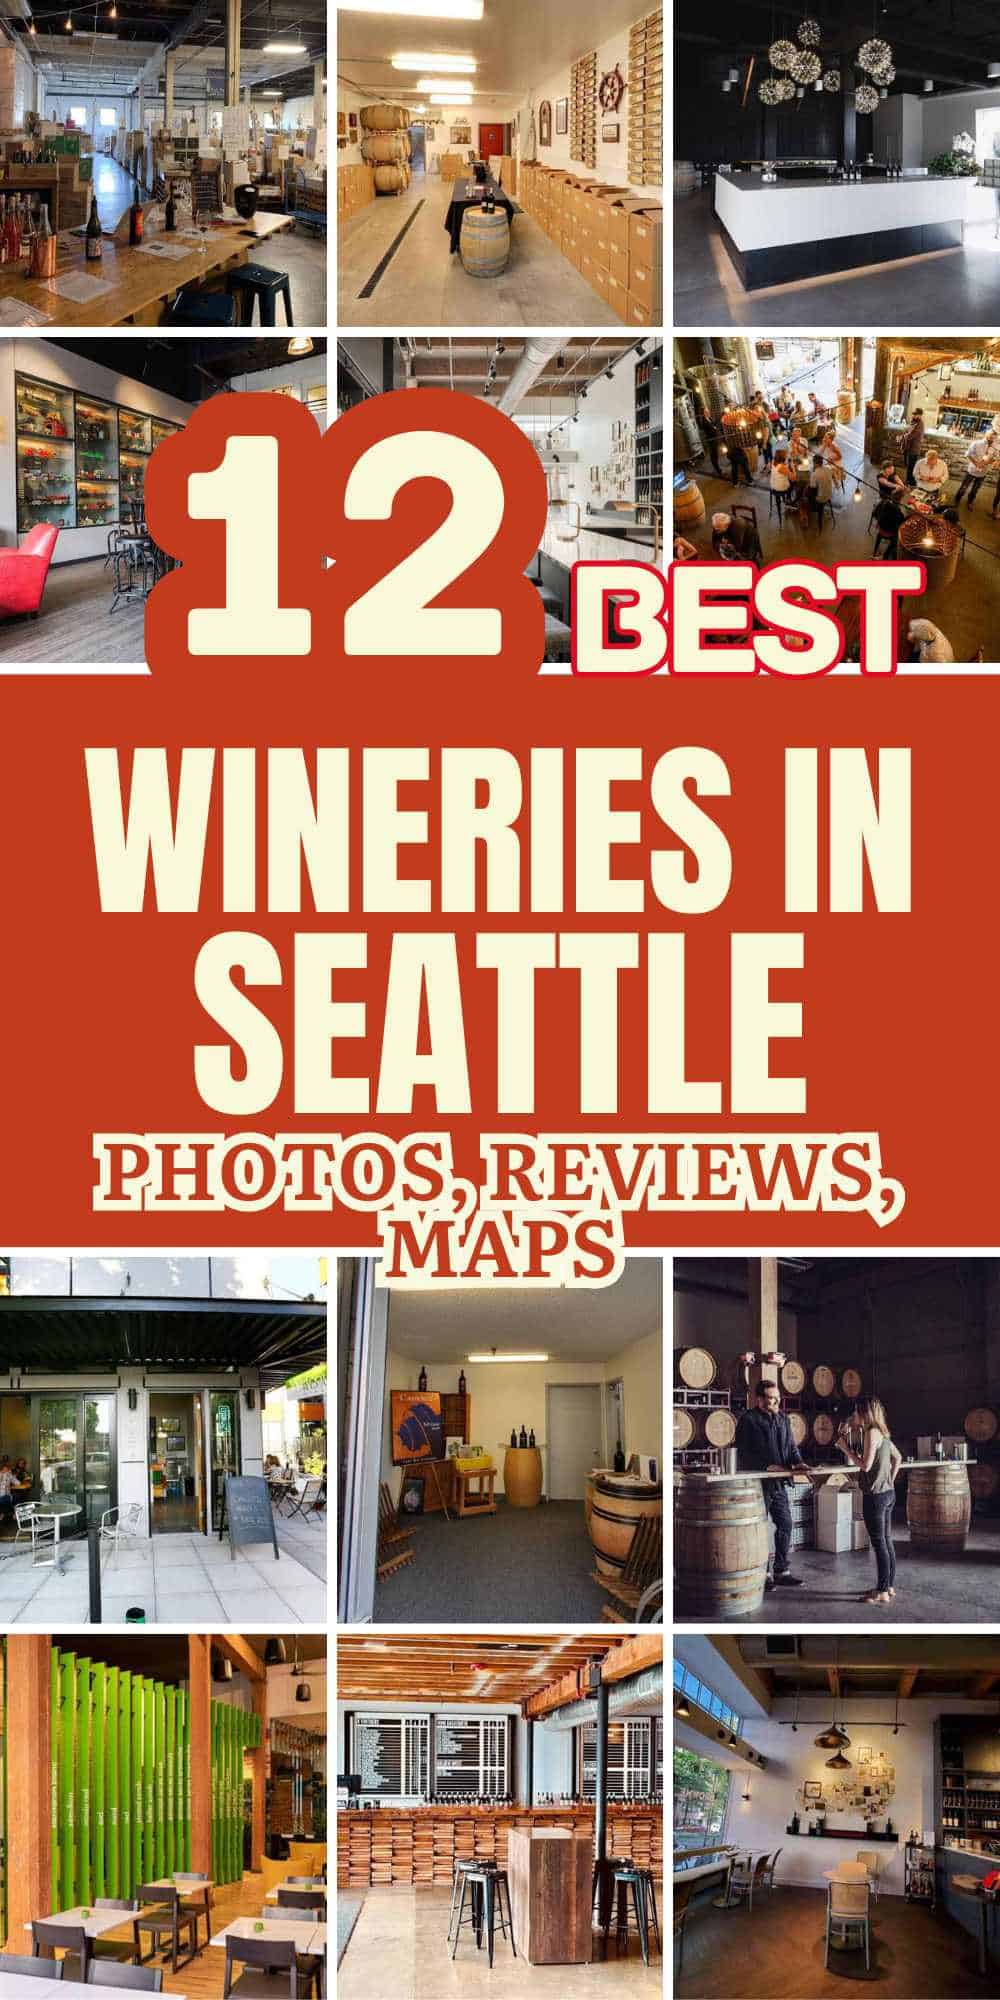 Wineries in Seattle